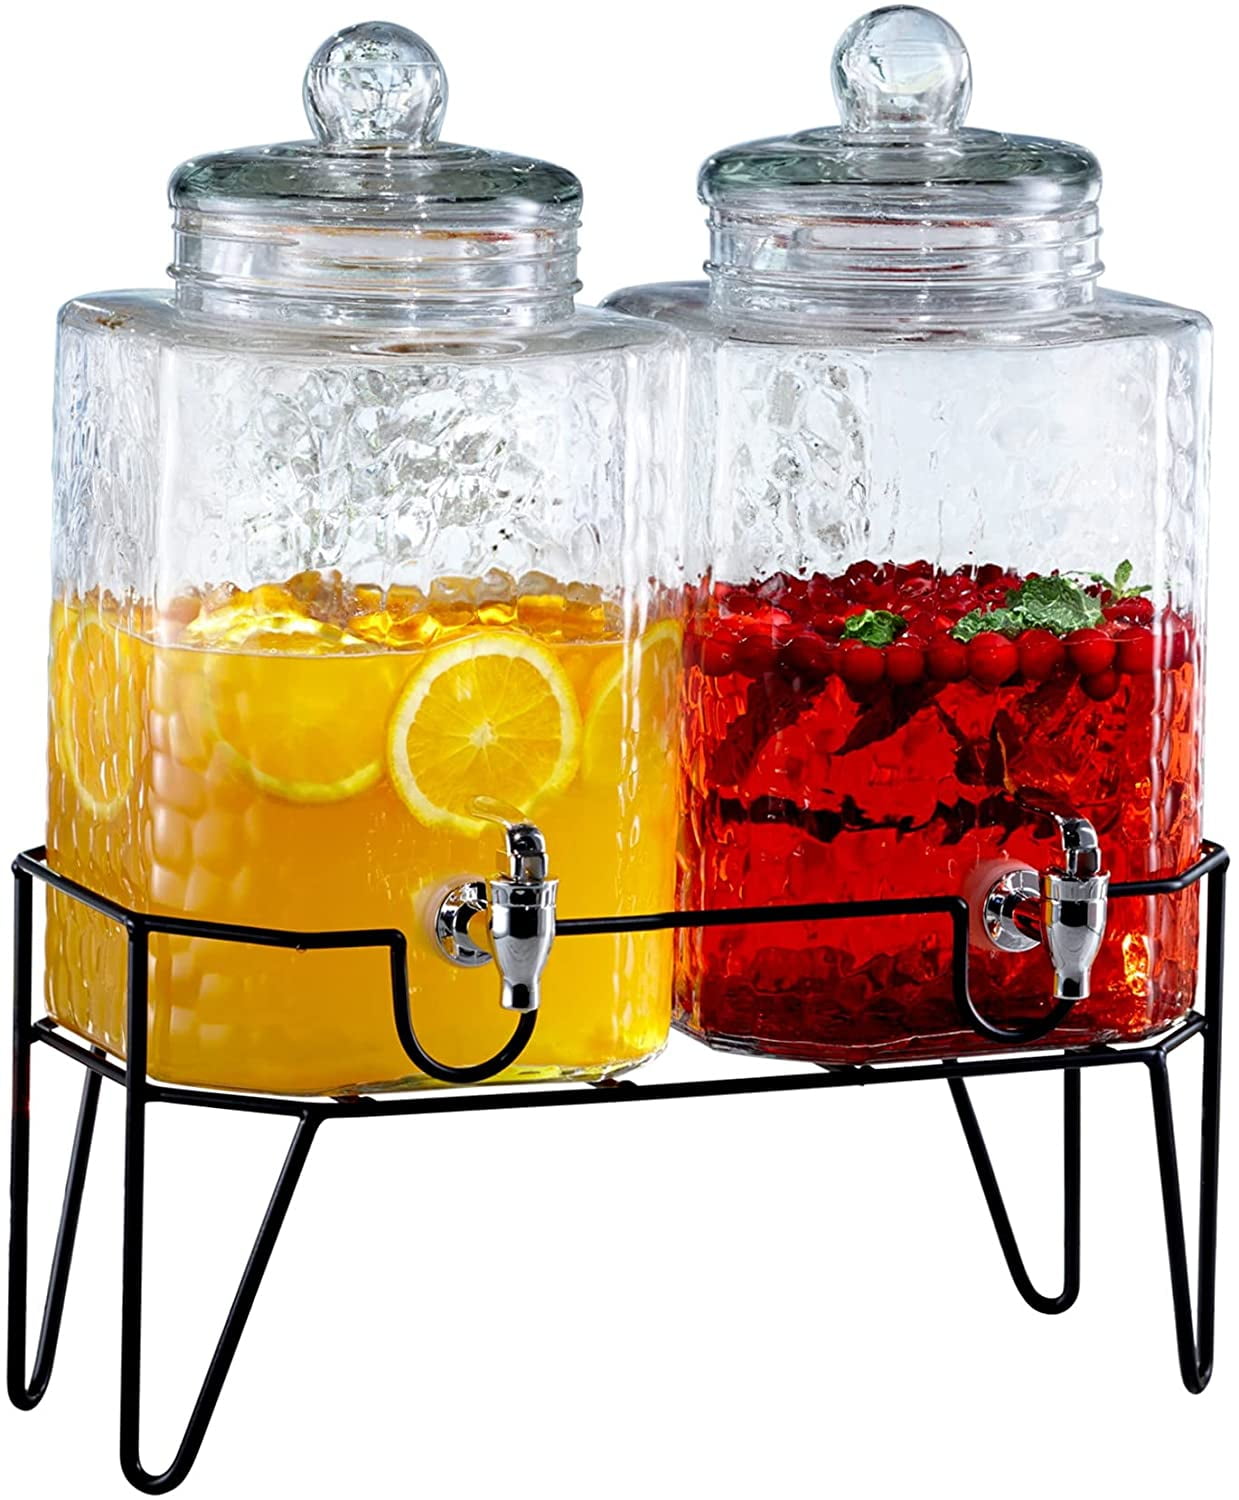 Style Setter 192 Gal. Glass Hamburg Beverage Serveware Dispensers with Stand  (Set of 2) 210266-gb - The Home Depot